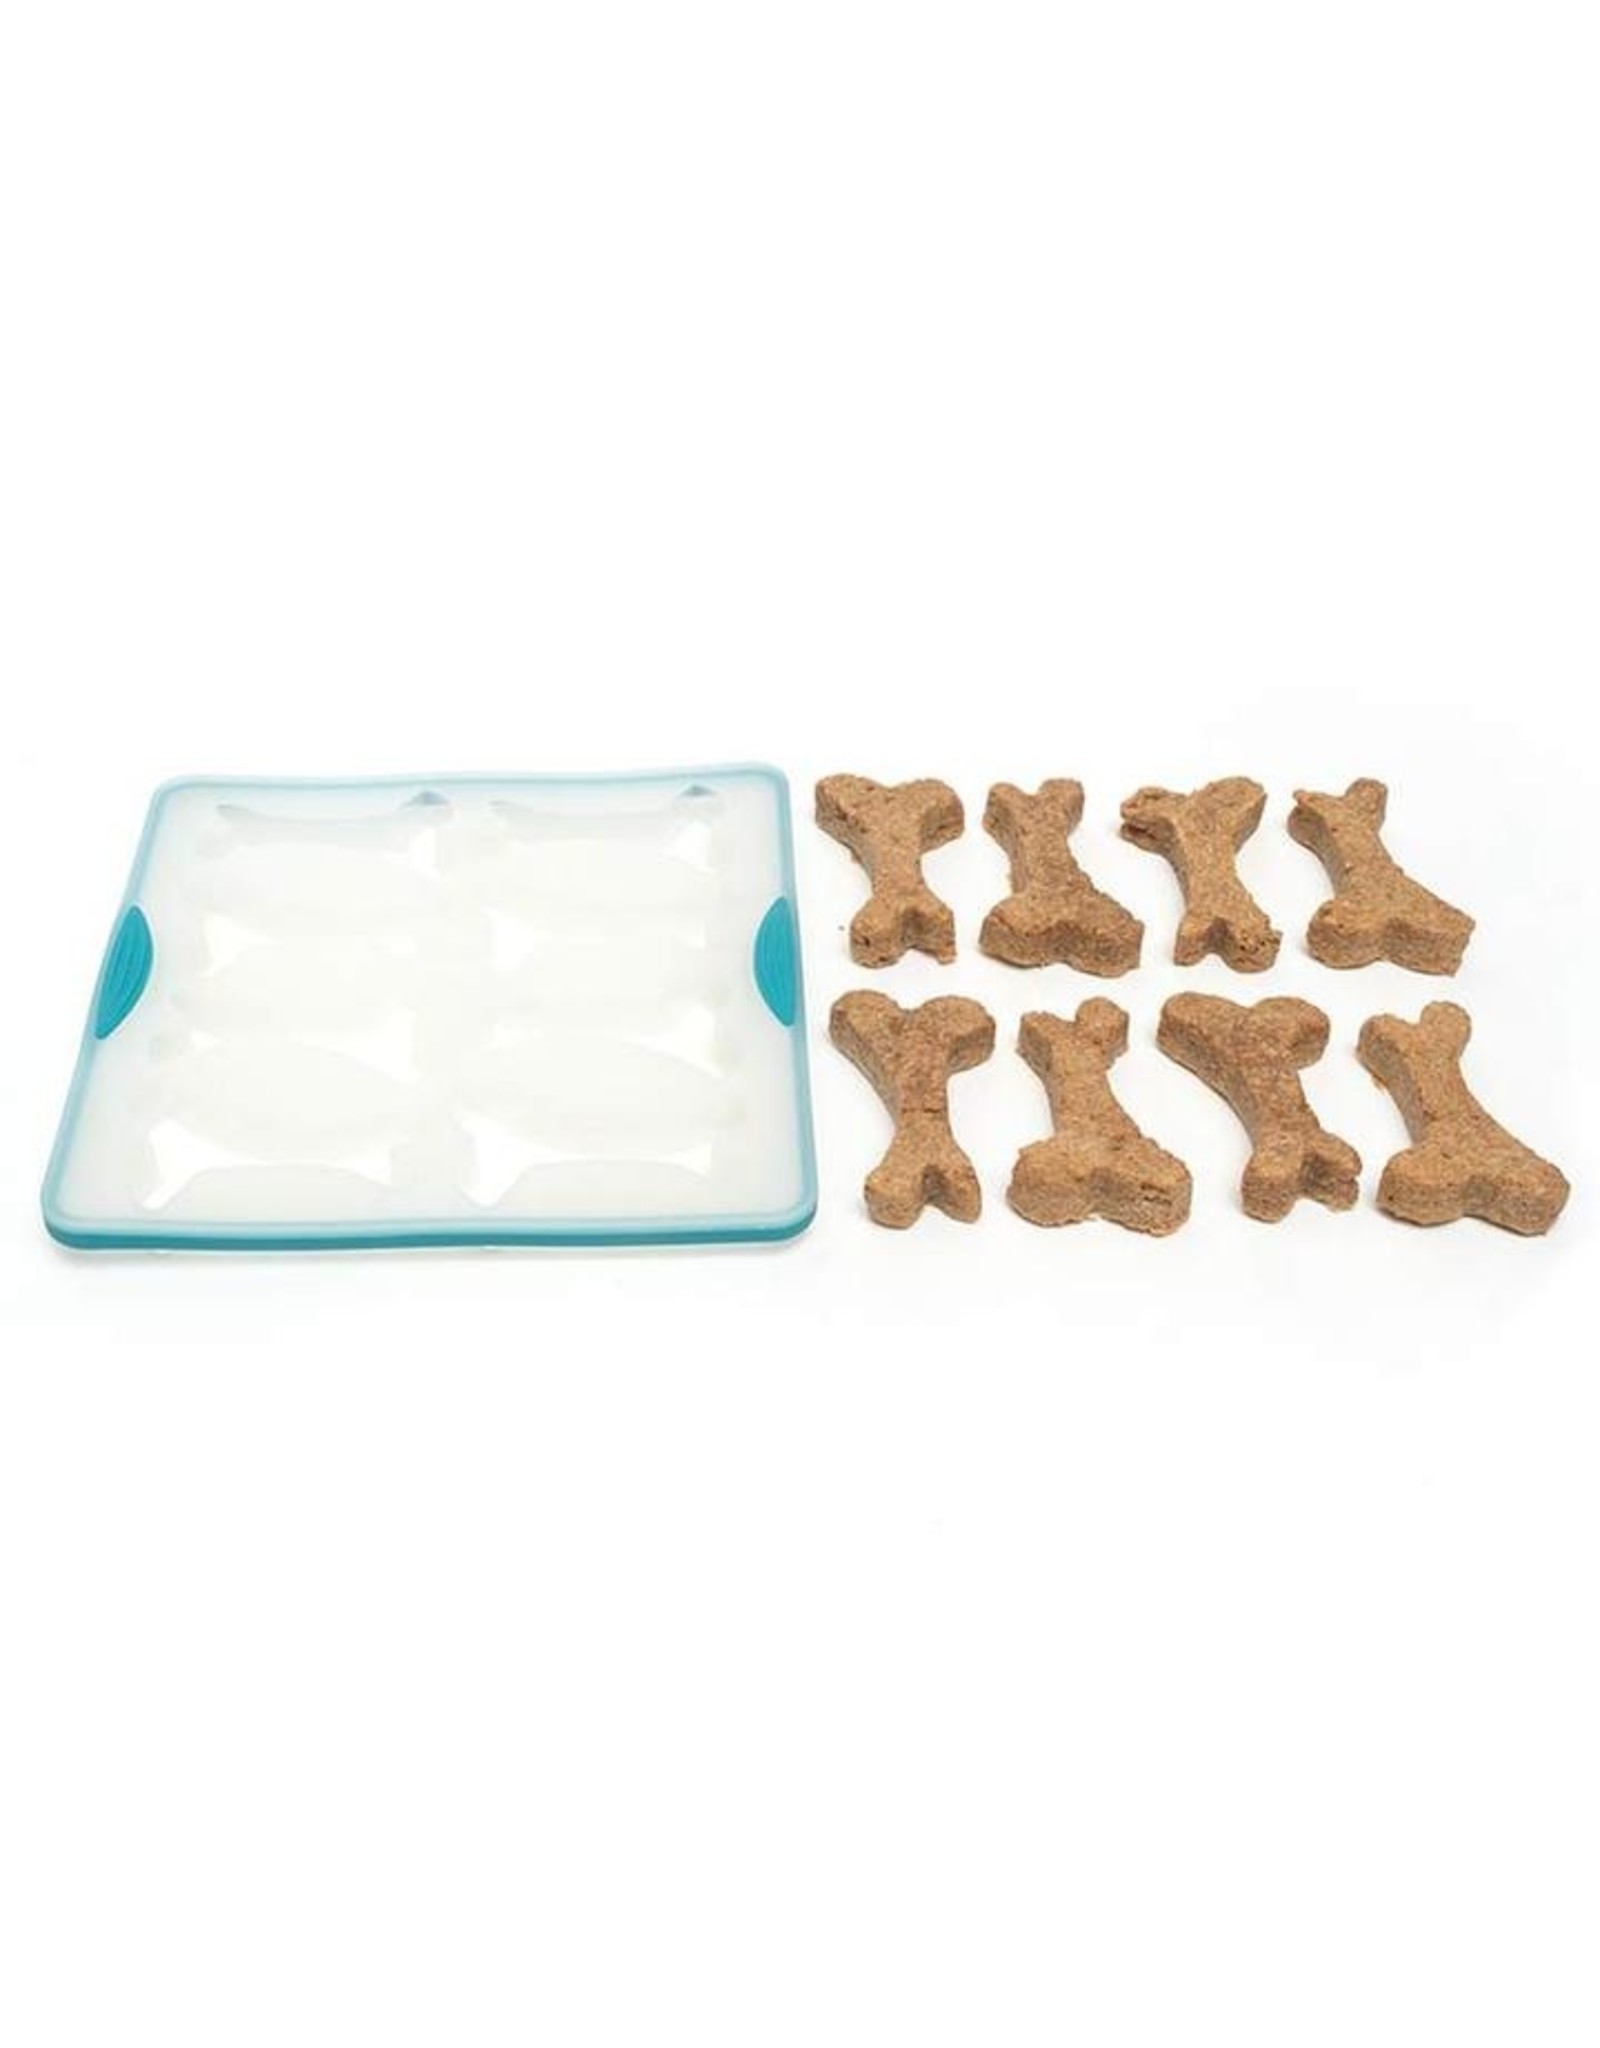 Messy Mutts MESSY MUTTS SILICONE LARGE DOG TREAT MAKER